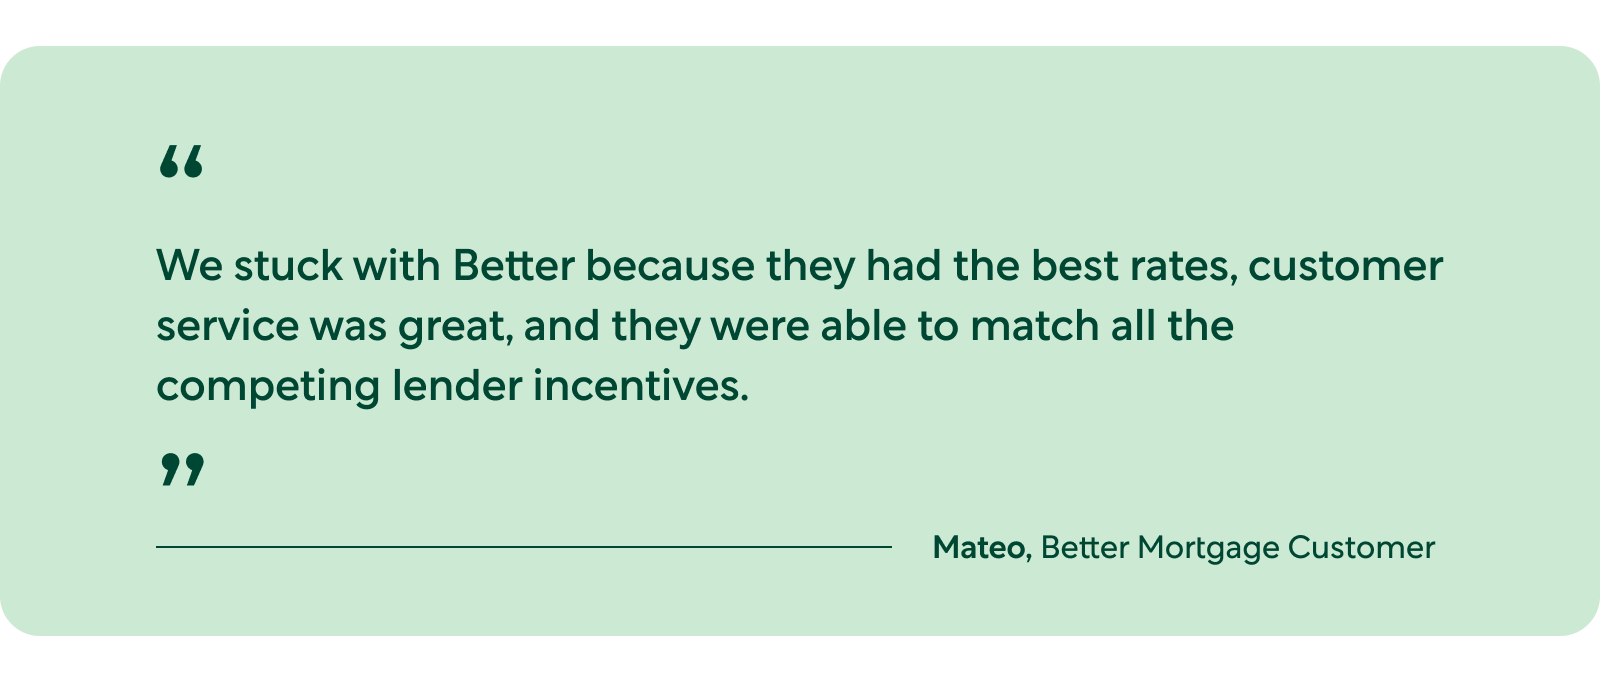 Quote by Mateo, a Better Mortgage Customer